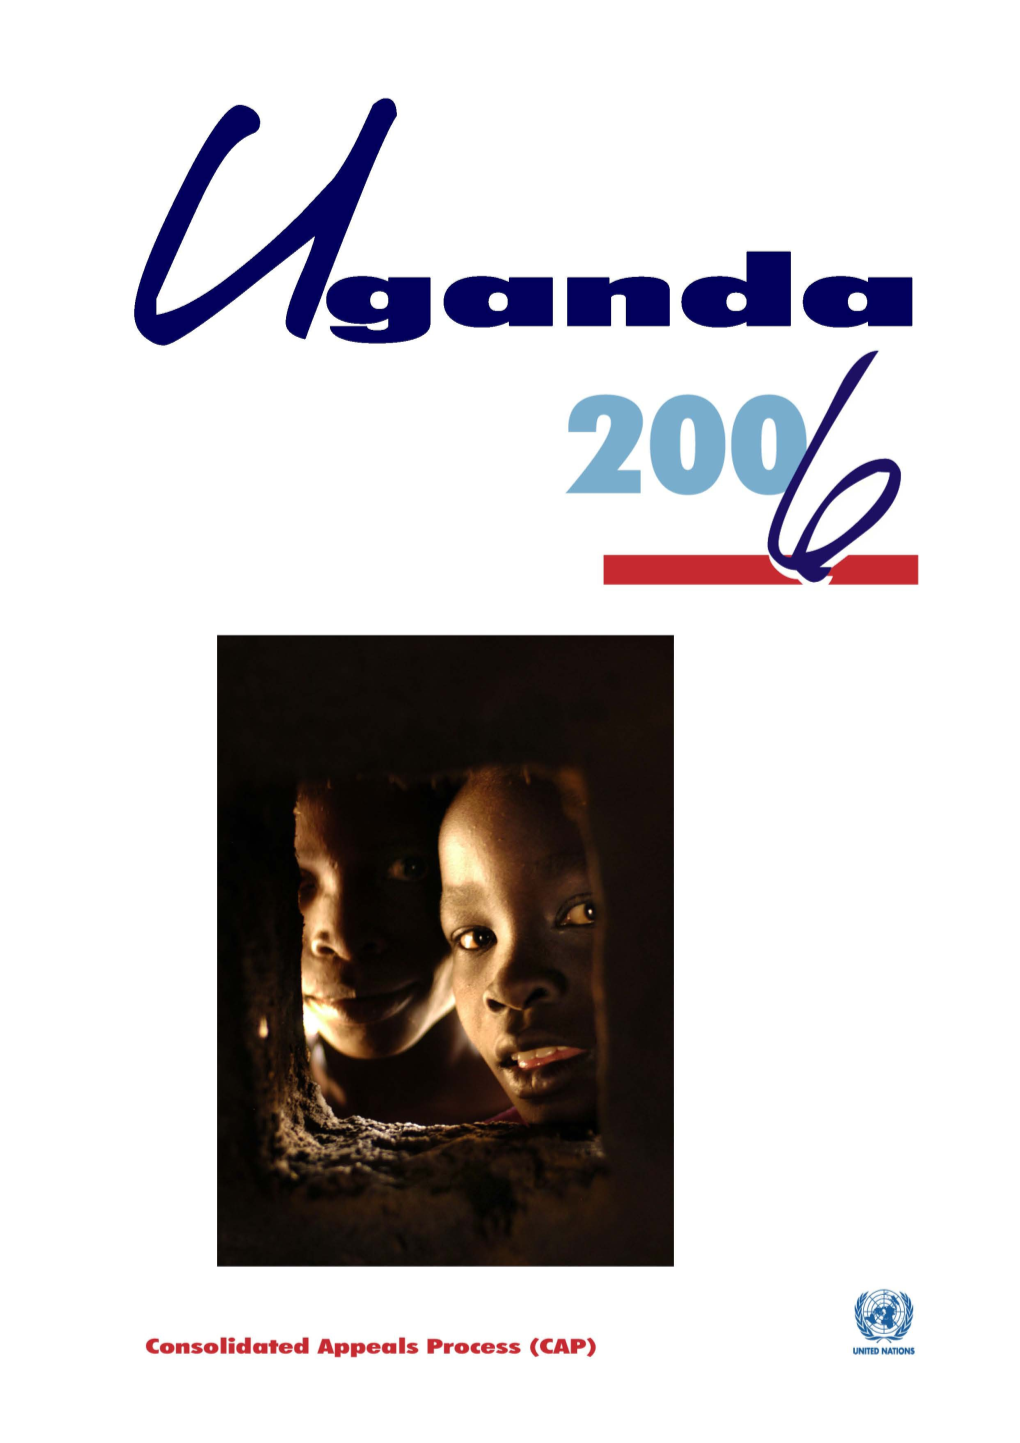 Consolidated Appeal for Uganda 2006 (Word)